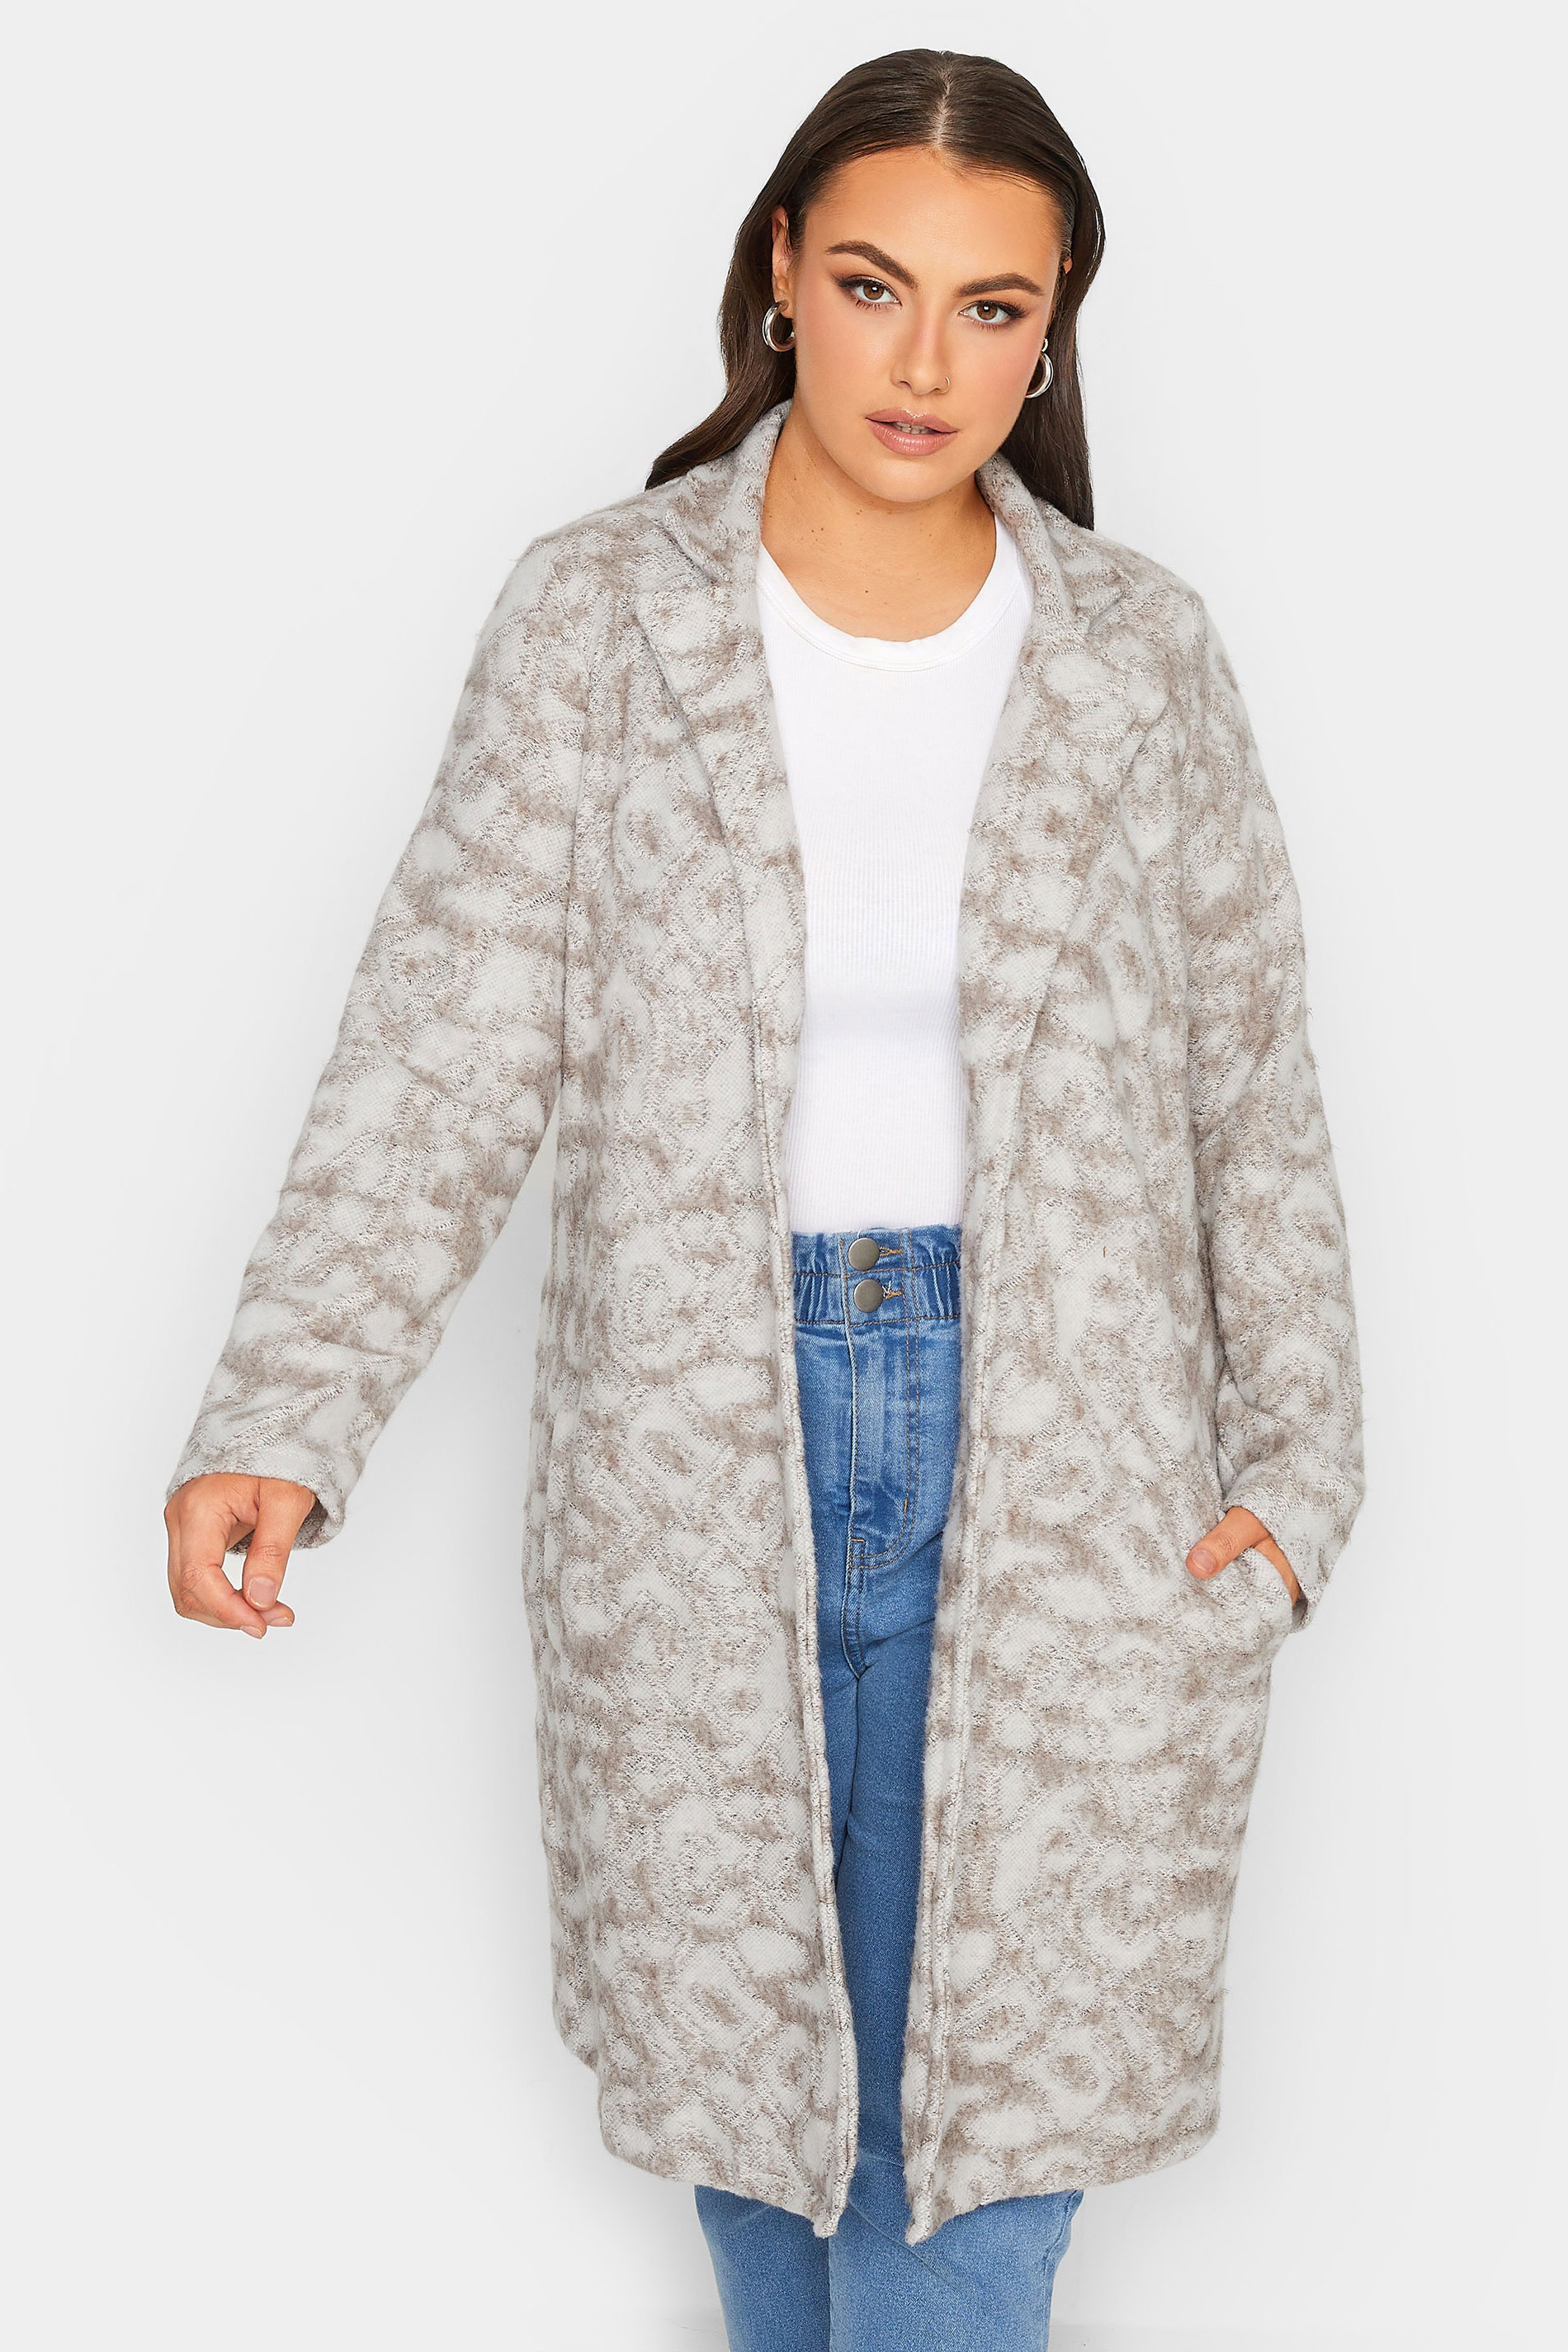 YOURS LUXURY Plus Size Beige Brown Animal Print Faux Fur Jacket | Yours Clothing 1